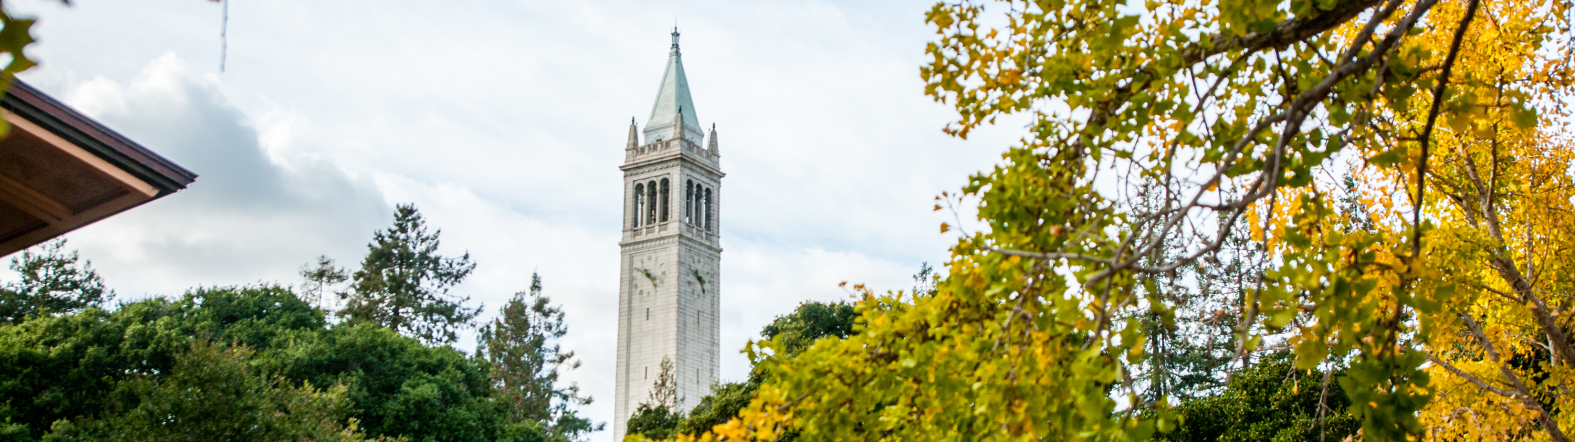 image of the campanile through trees with yellow flowers